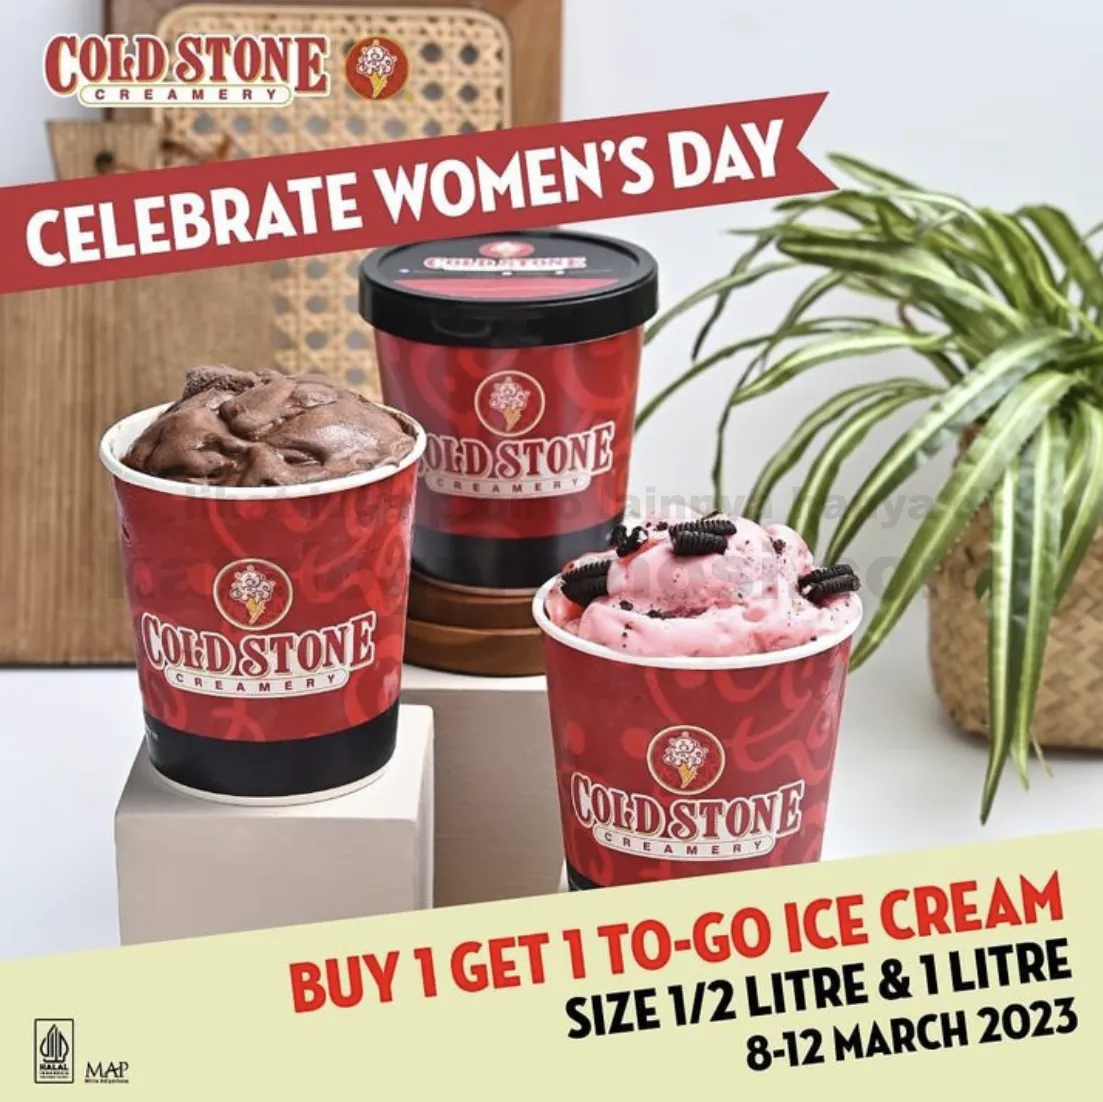 Promo COLD STONE Celebrate Women’s Day - Buy 1 Get 1 To-Go Ice Cream for size 1 Liter dan ½ Liter